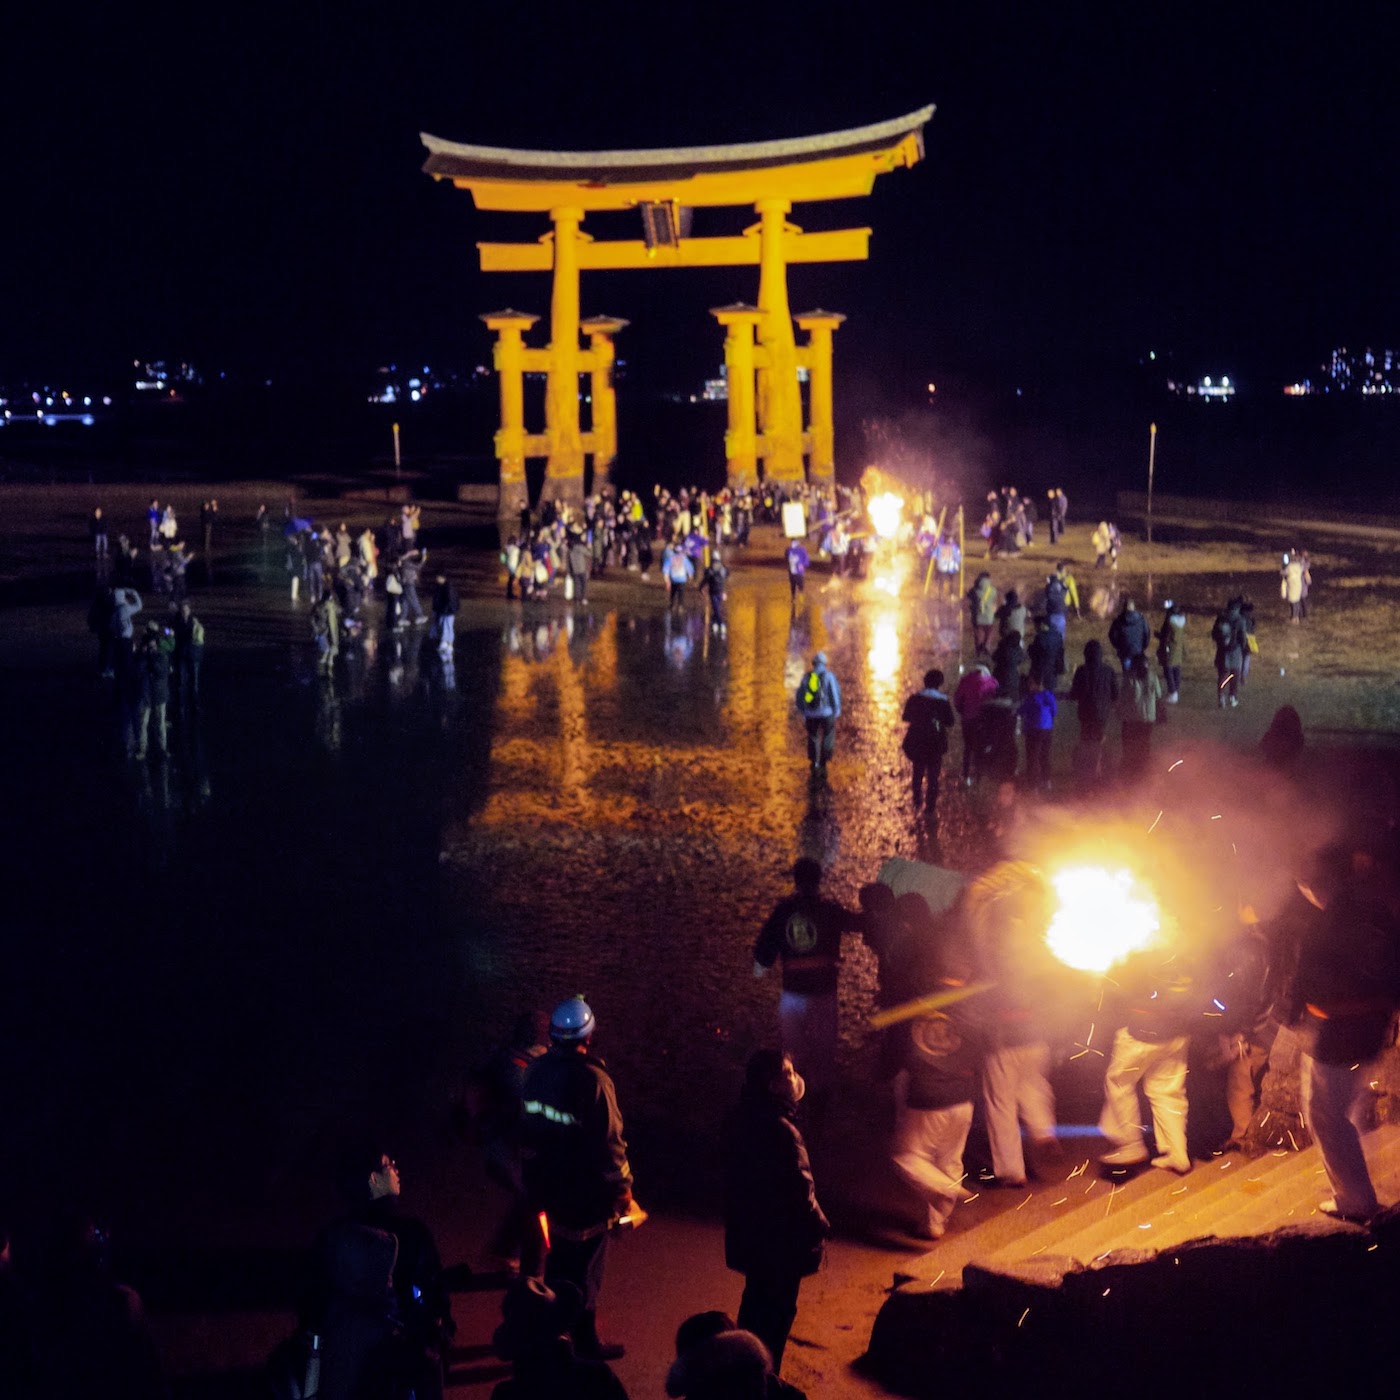 Torches head down to the great torii gate